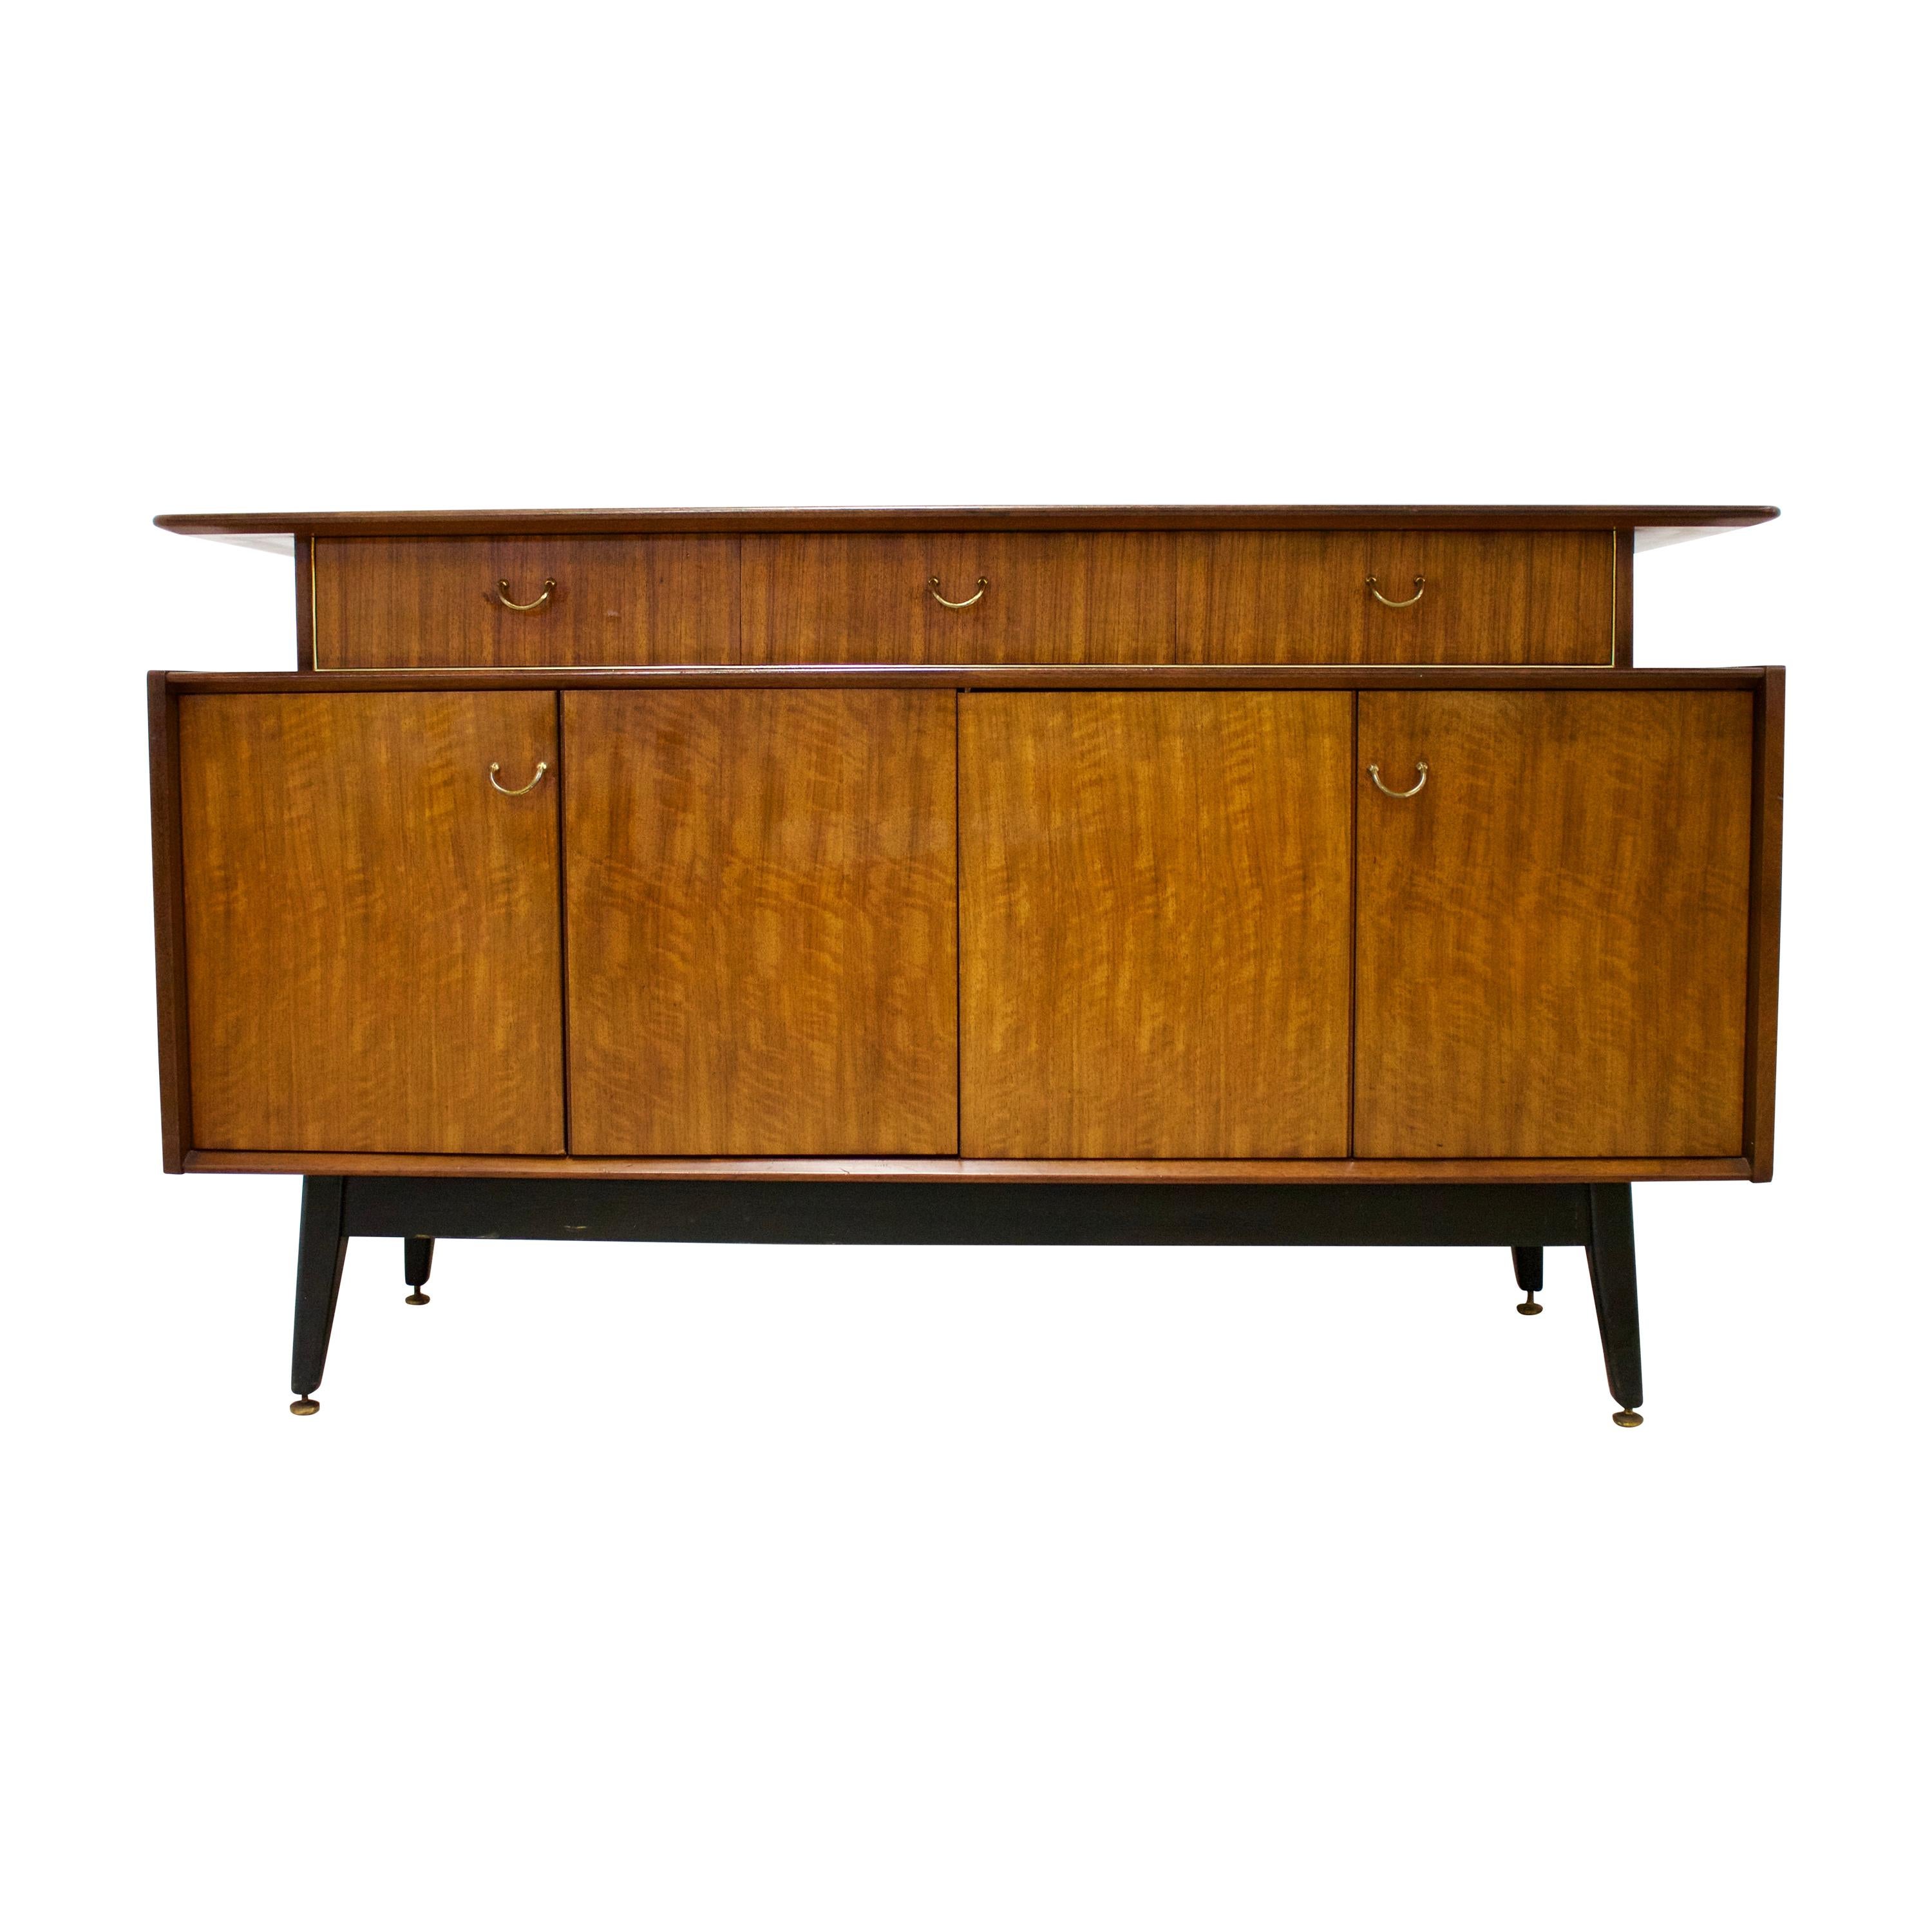 Midcentury Retro Librenza Sideboard by G-Plan, 1960s